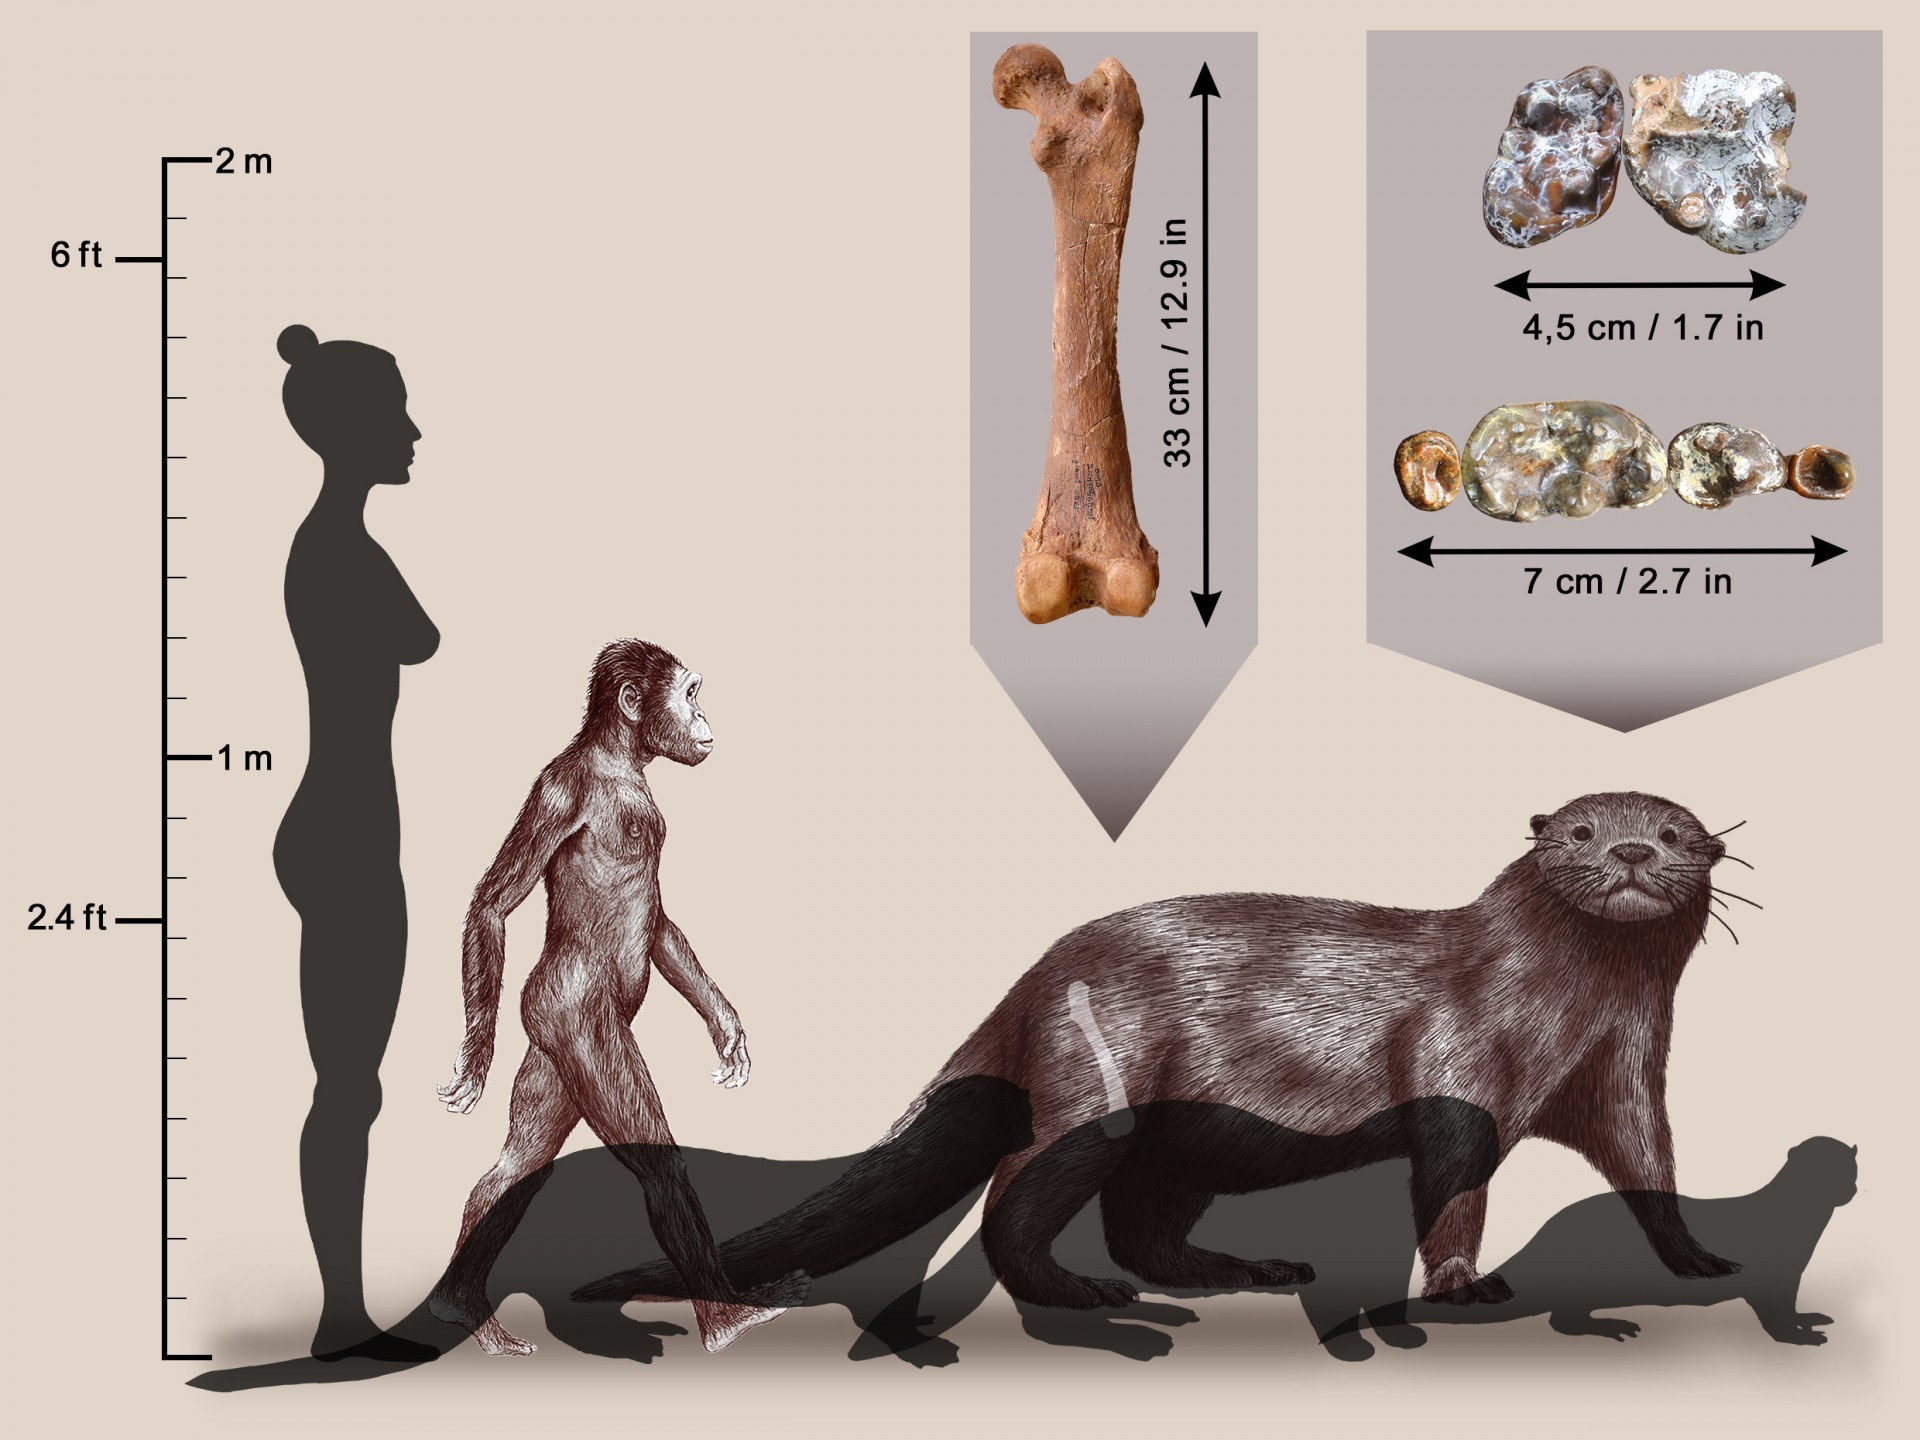 Reconstruction of the otter Enhydriodon omoensis (in background), compared with three current species, left to right: the South American giant otter; the sea otter; and an African otter. E. omoensis occupied Ethiopia’s Lower Omo Valley at the same time as human ancestors known as Australopithecines (shown here for size comparison along with a modern human). The otter’s femur and dental remains are shown in insets. (© Sabine Riffaut, Camille Grohé / Palevoprim / CNRS – Université de Poitiers)